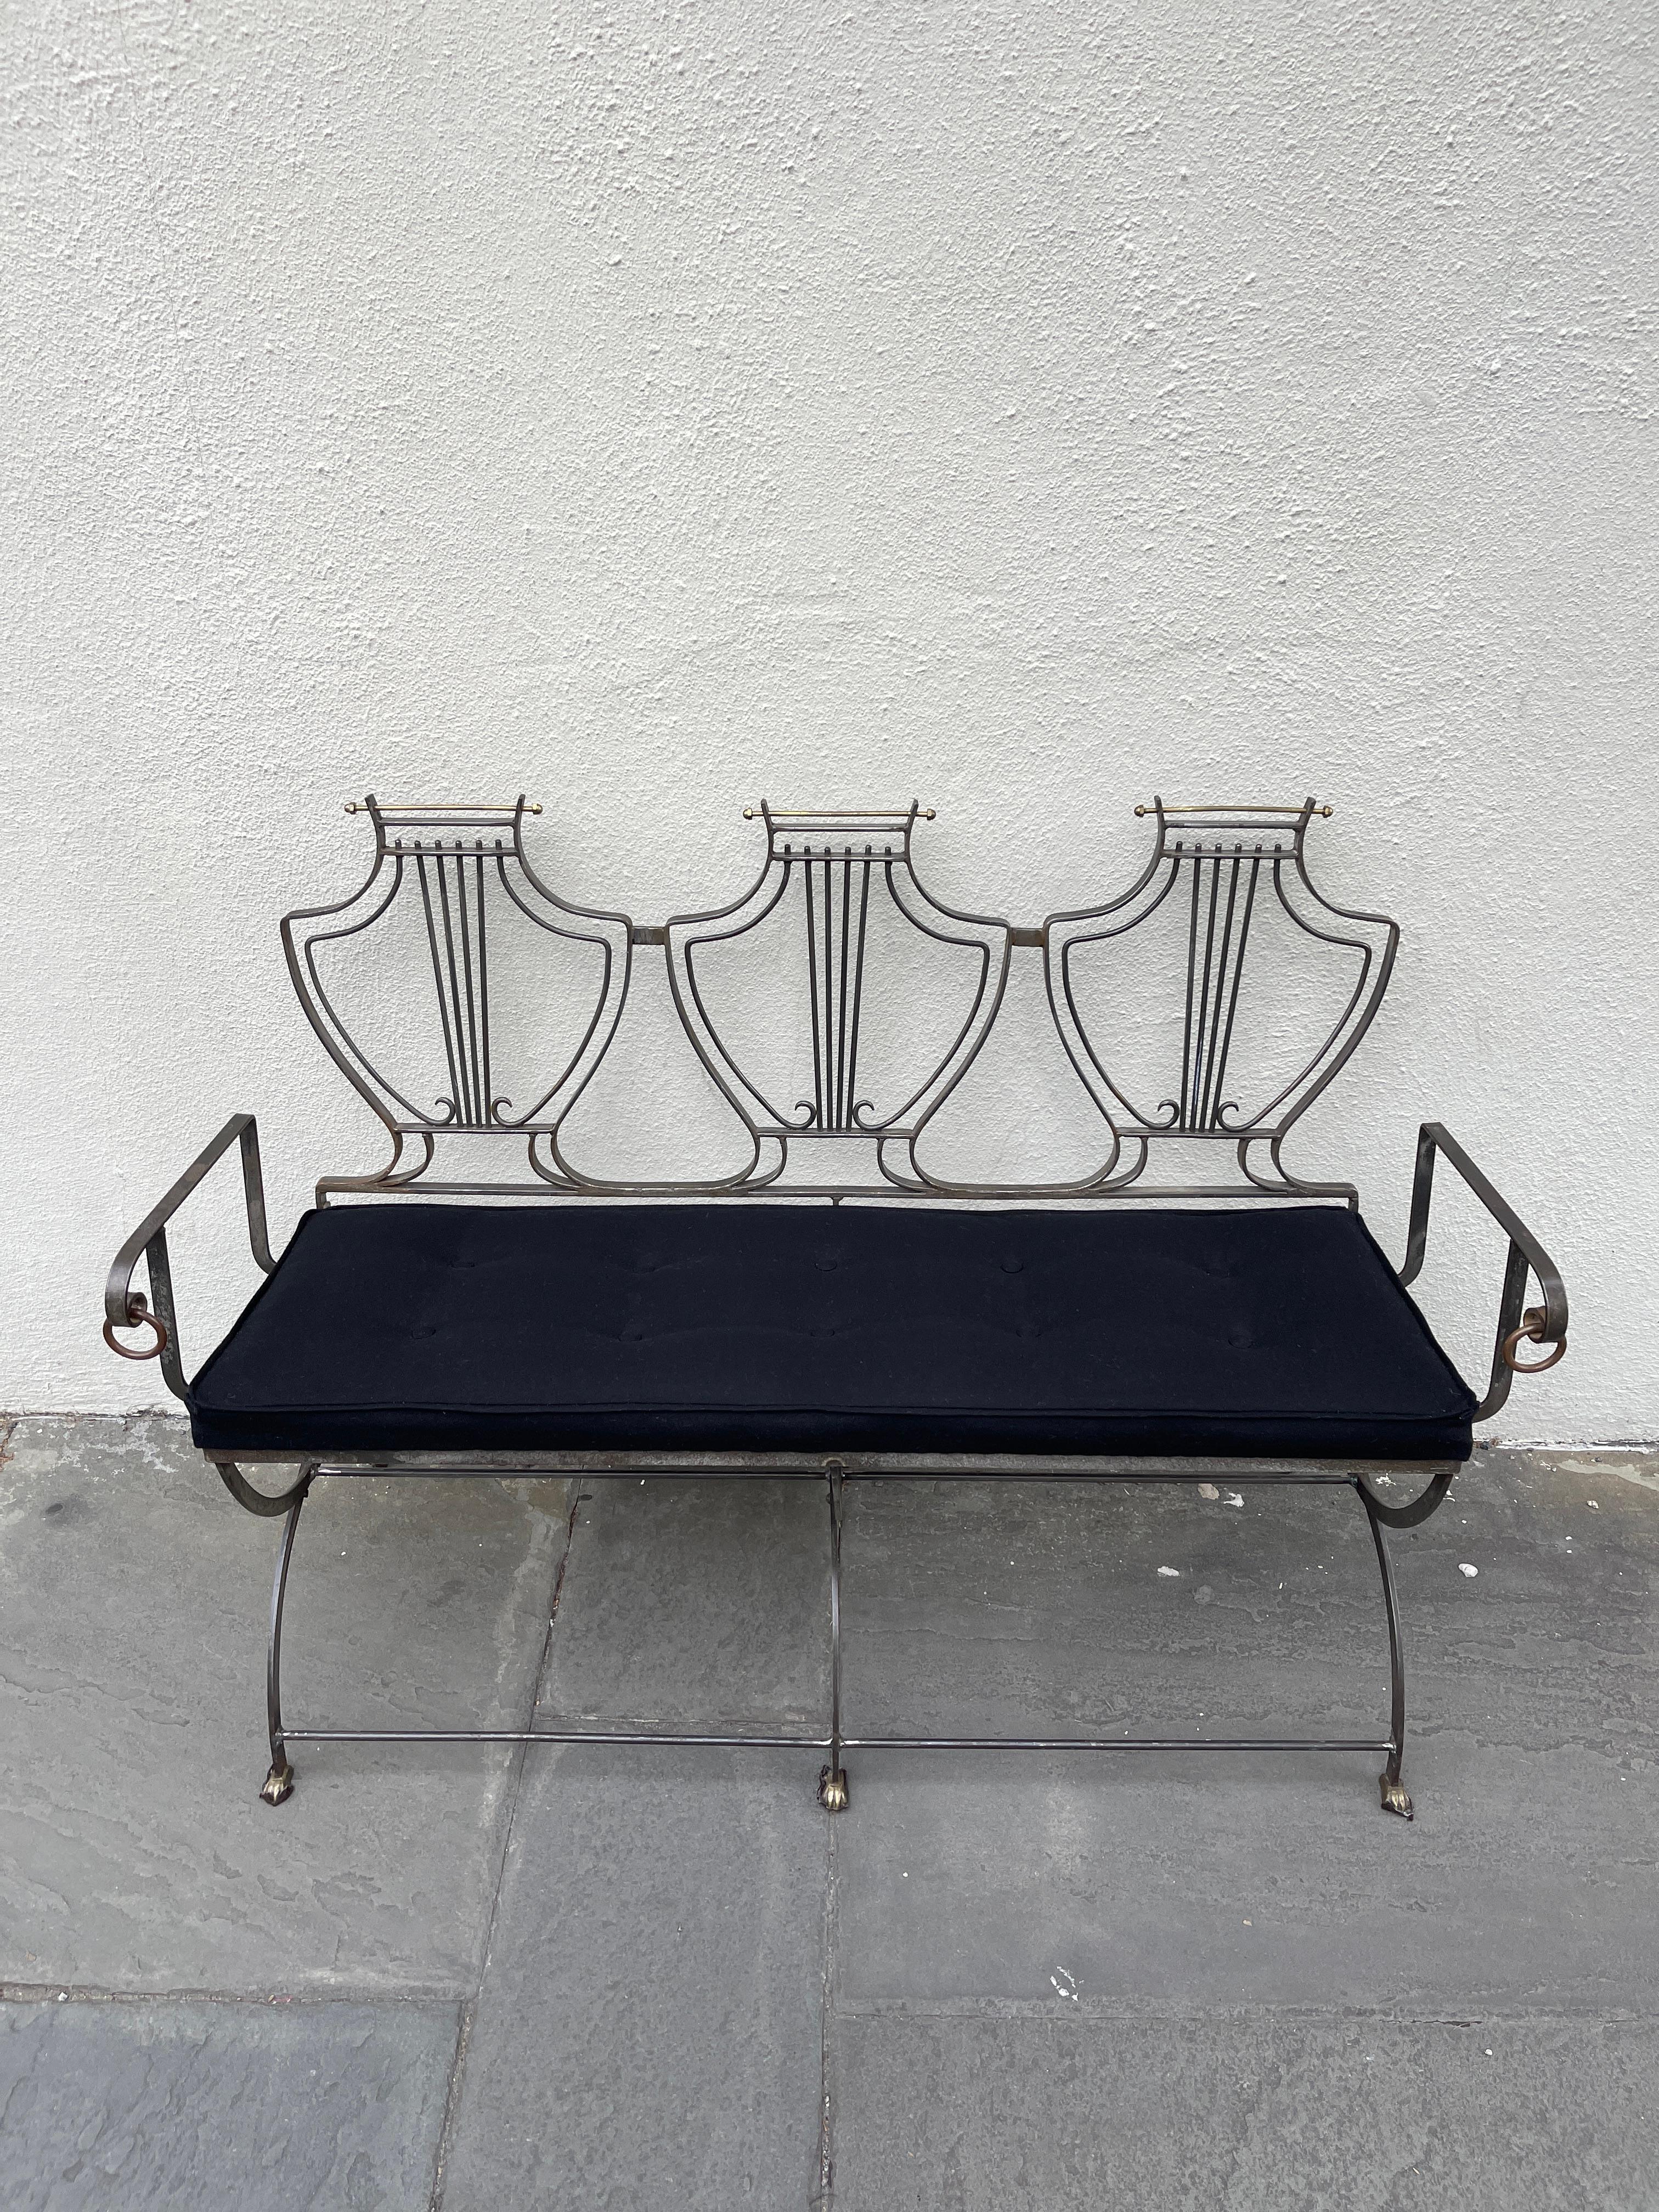 Mixed metal architectural formed bench with tufted cashmere seat bottom.